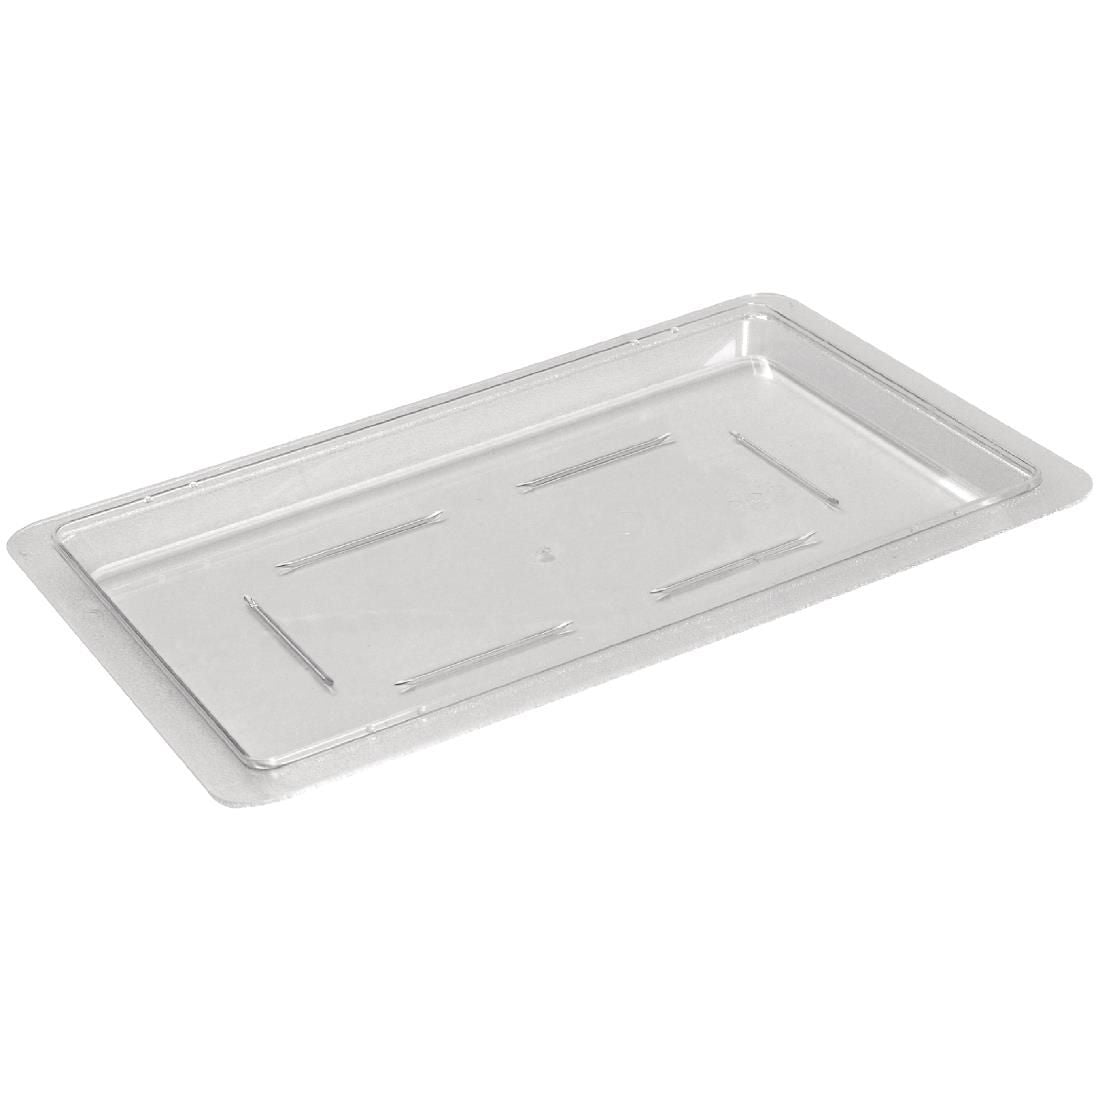 CG988 Vogue Polycarbonate Lid Small JD Catering Equipment Solutions Ltd